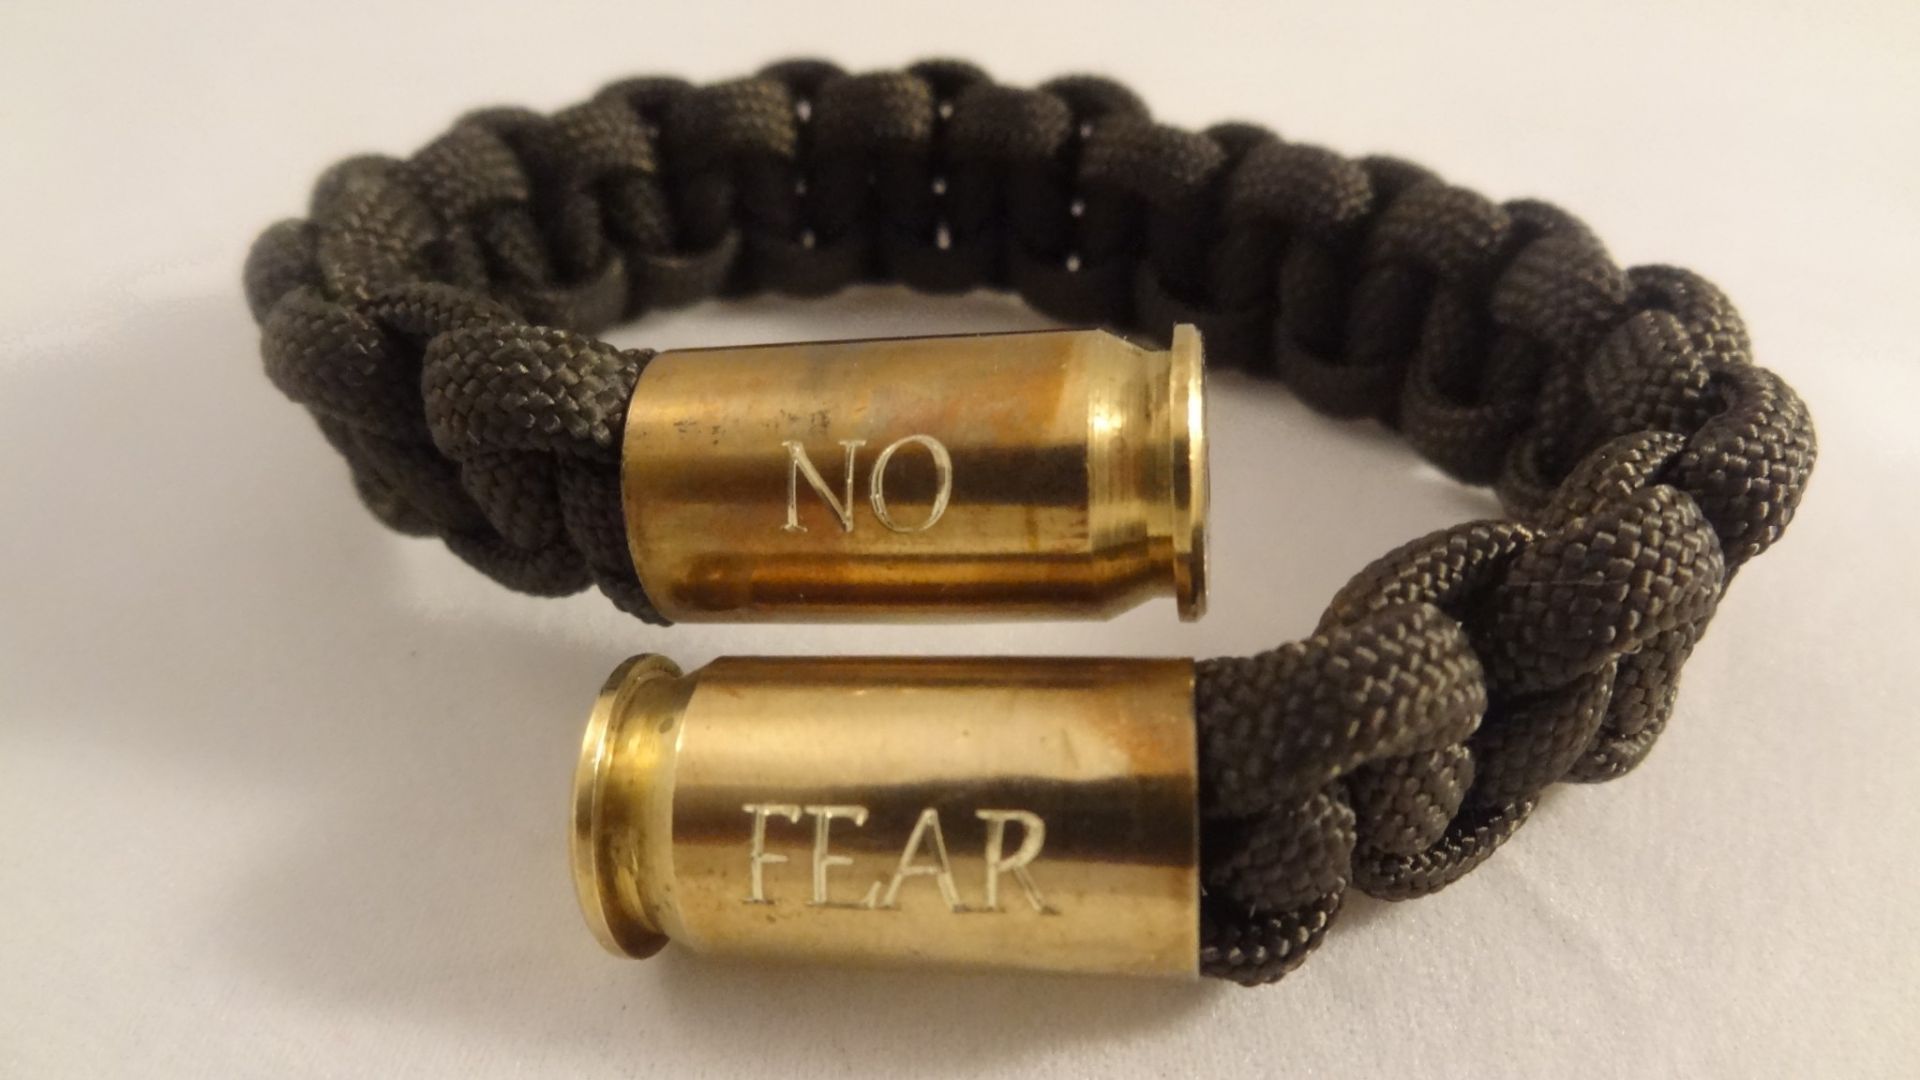 Bullet Bracelets - A Fashion Statement With A Controversial Past